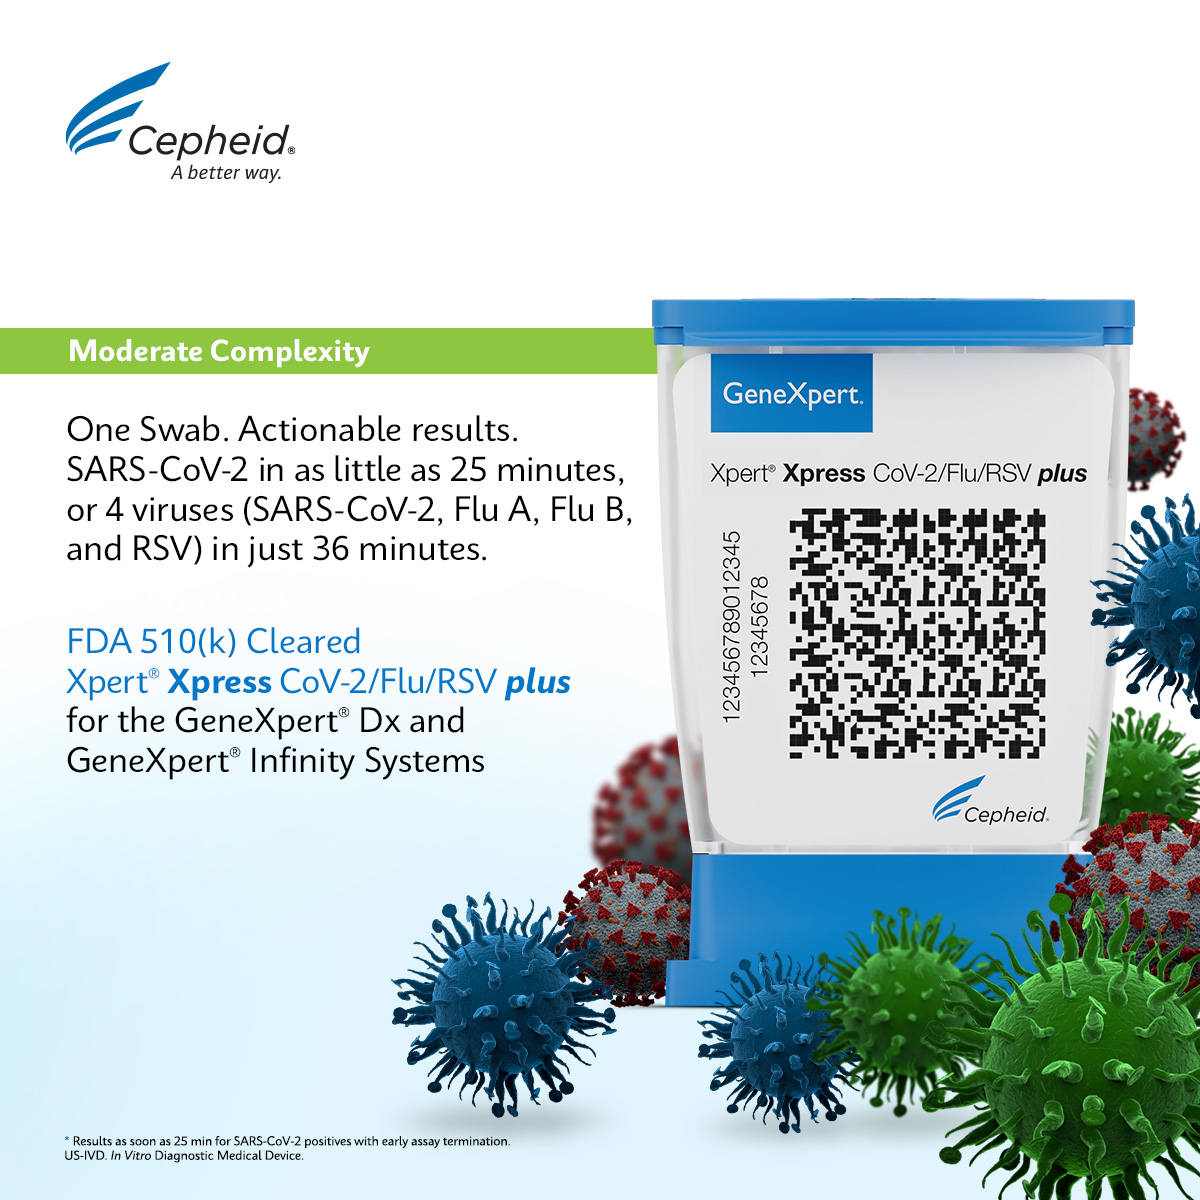 Xpert® Xpress CoV-2/Flu/RSV plus test for the GeneXpert® Dx and GeneXpert® Infinity systems was recently granted 510(k) clearance by the FDA. #Multiplex #PCRTesting Learn more about the test and how it could benefit your patients now: ow.ly/zqeo50R6RSP